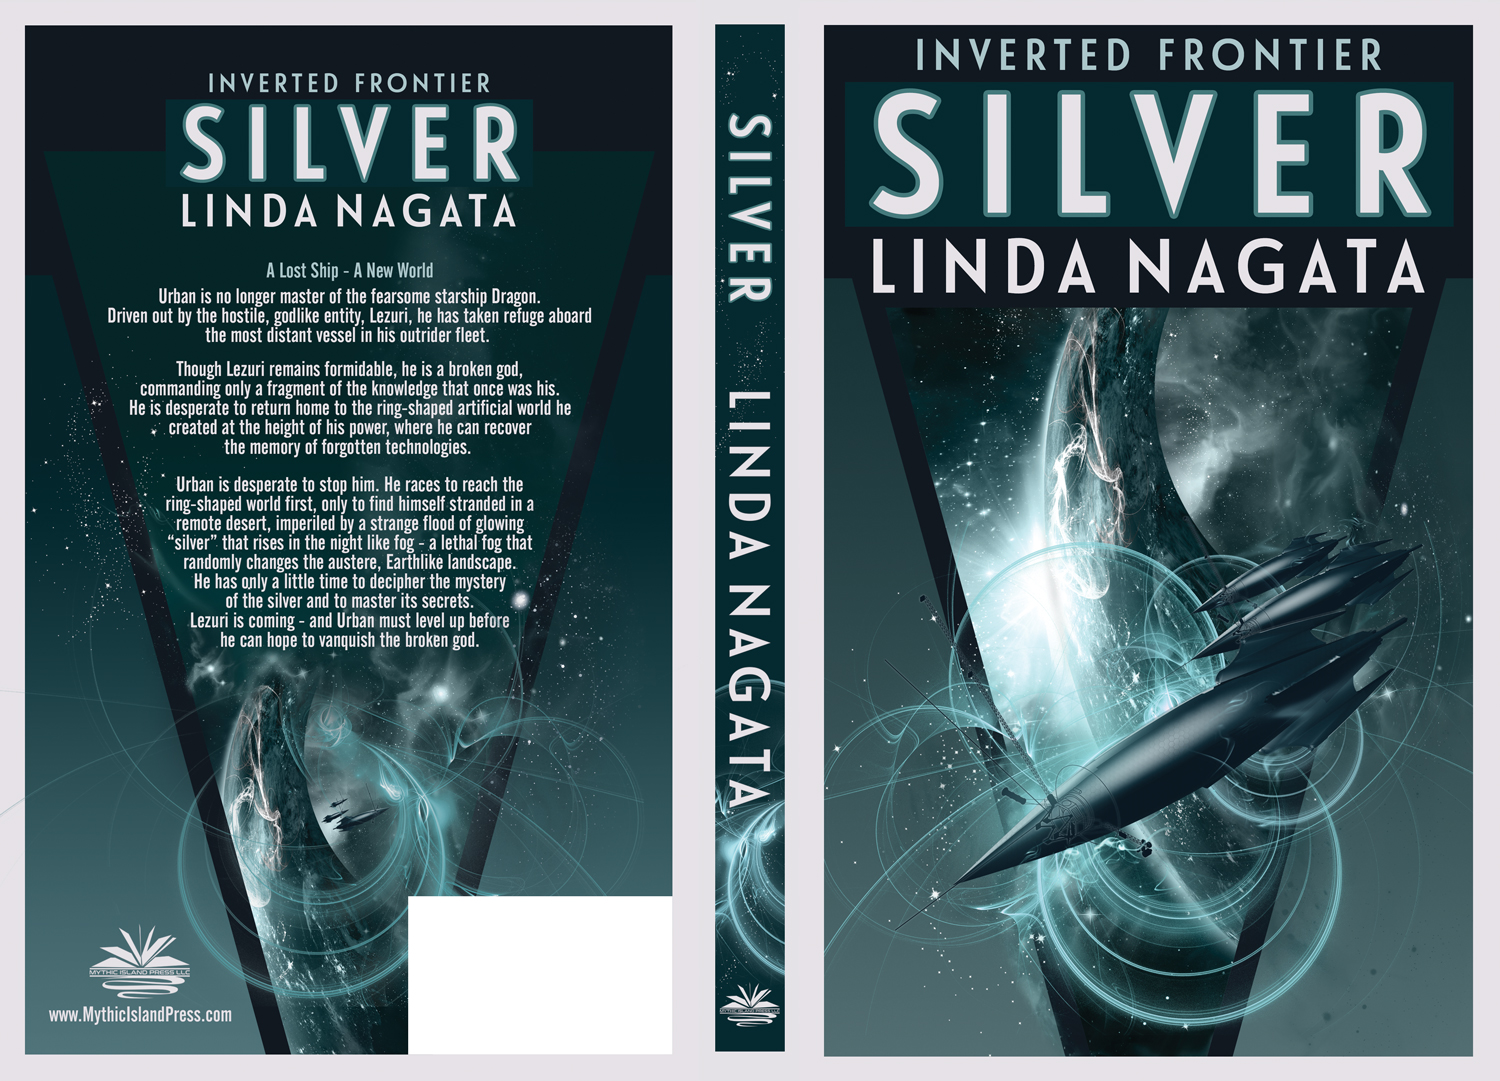 Inverted Frontier Series By Linda Nagata